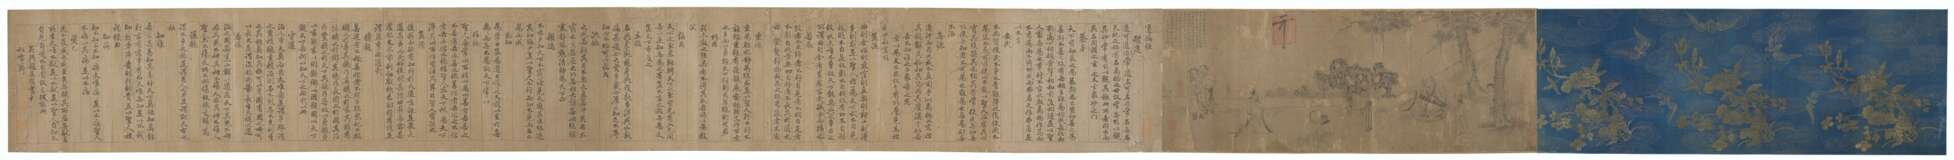 WITH SIGNATURES OF LI GONGLIN (1049-1106) AND ZHAO MENGFU (1254-1322) - Foto 1